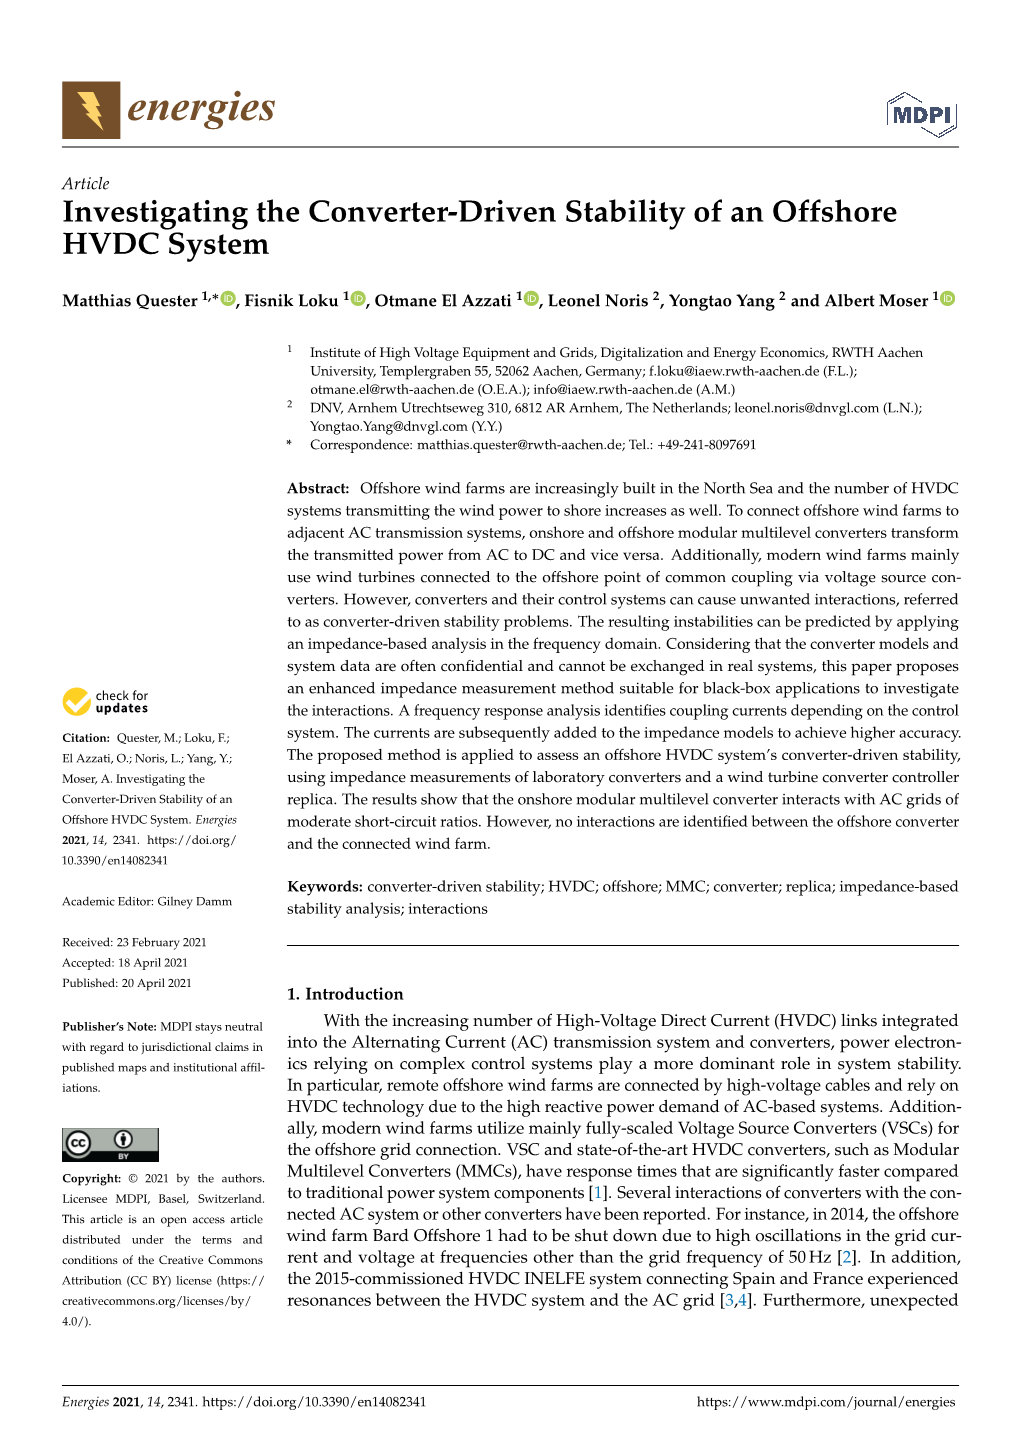 Investigating the Converter-Driven Stability of an Offshore HVDC System